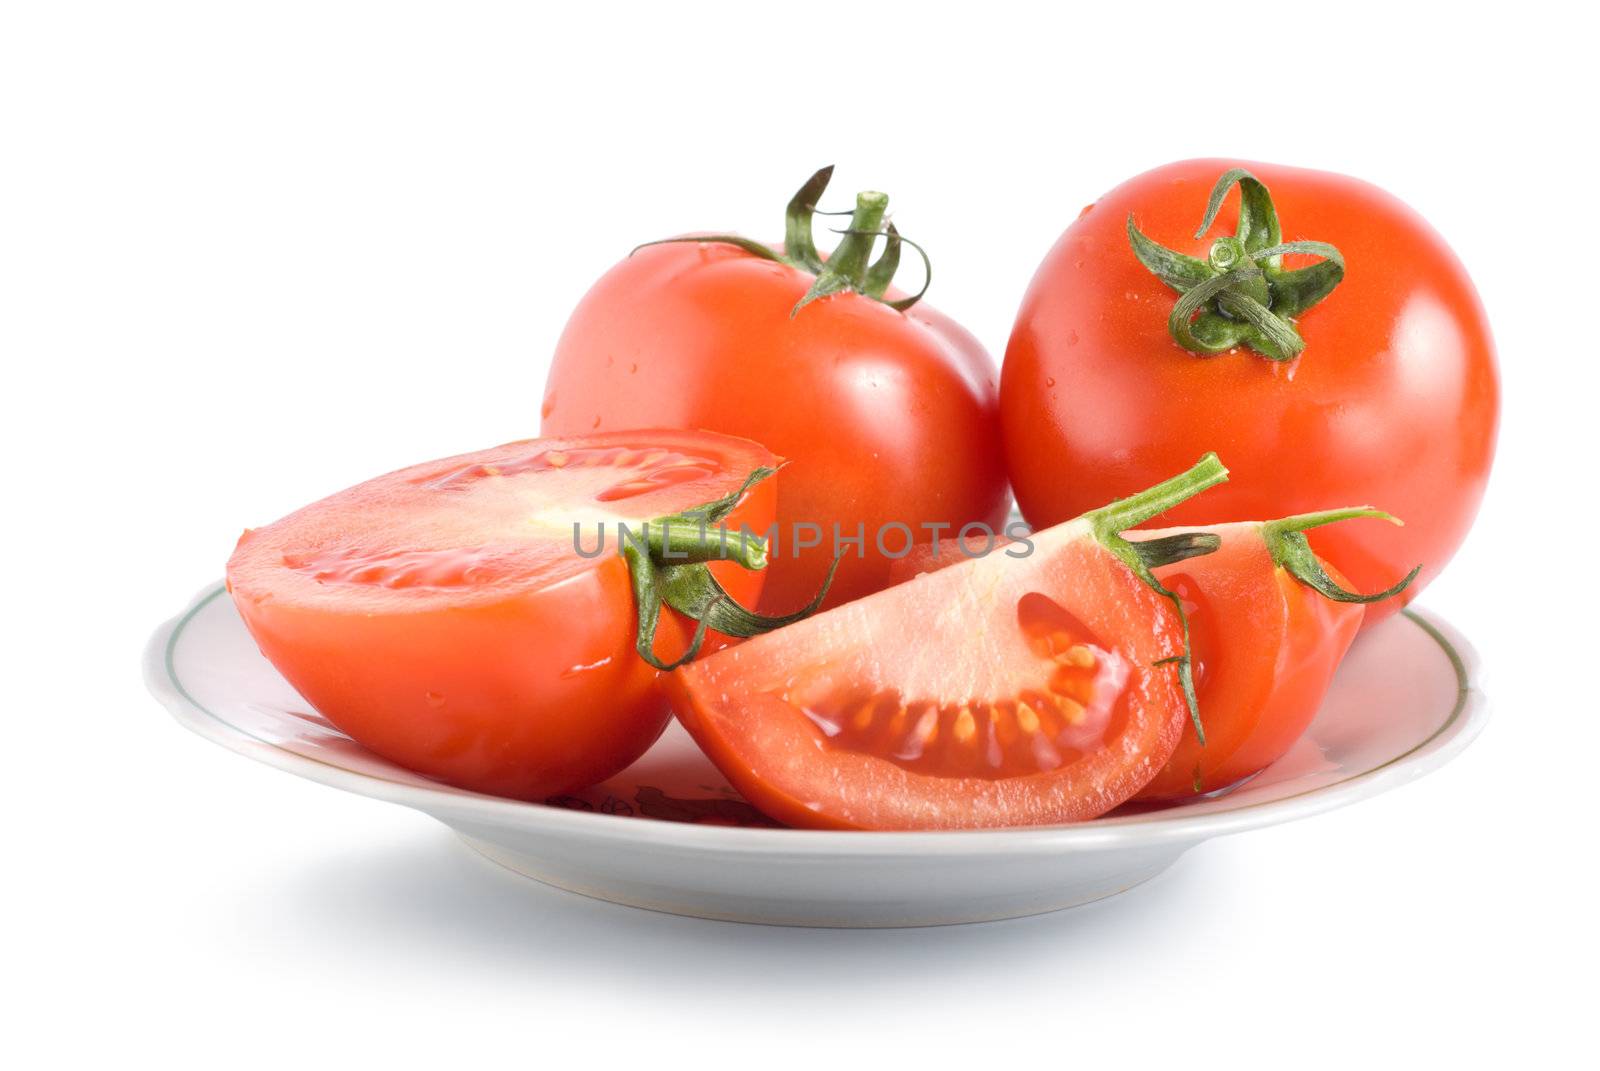 Tomatoes on a plate isolated on white background